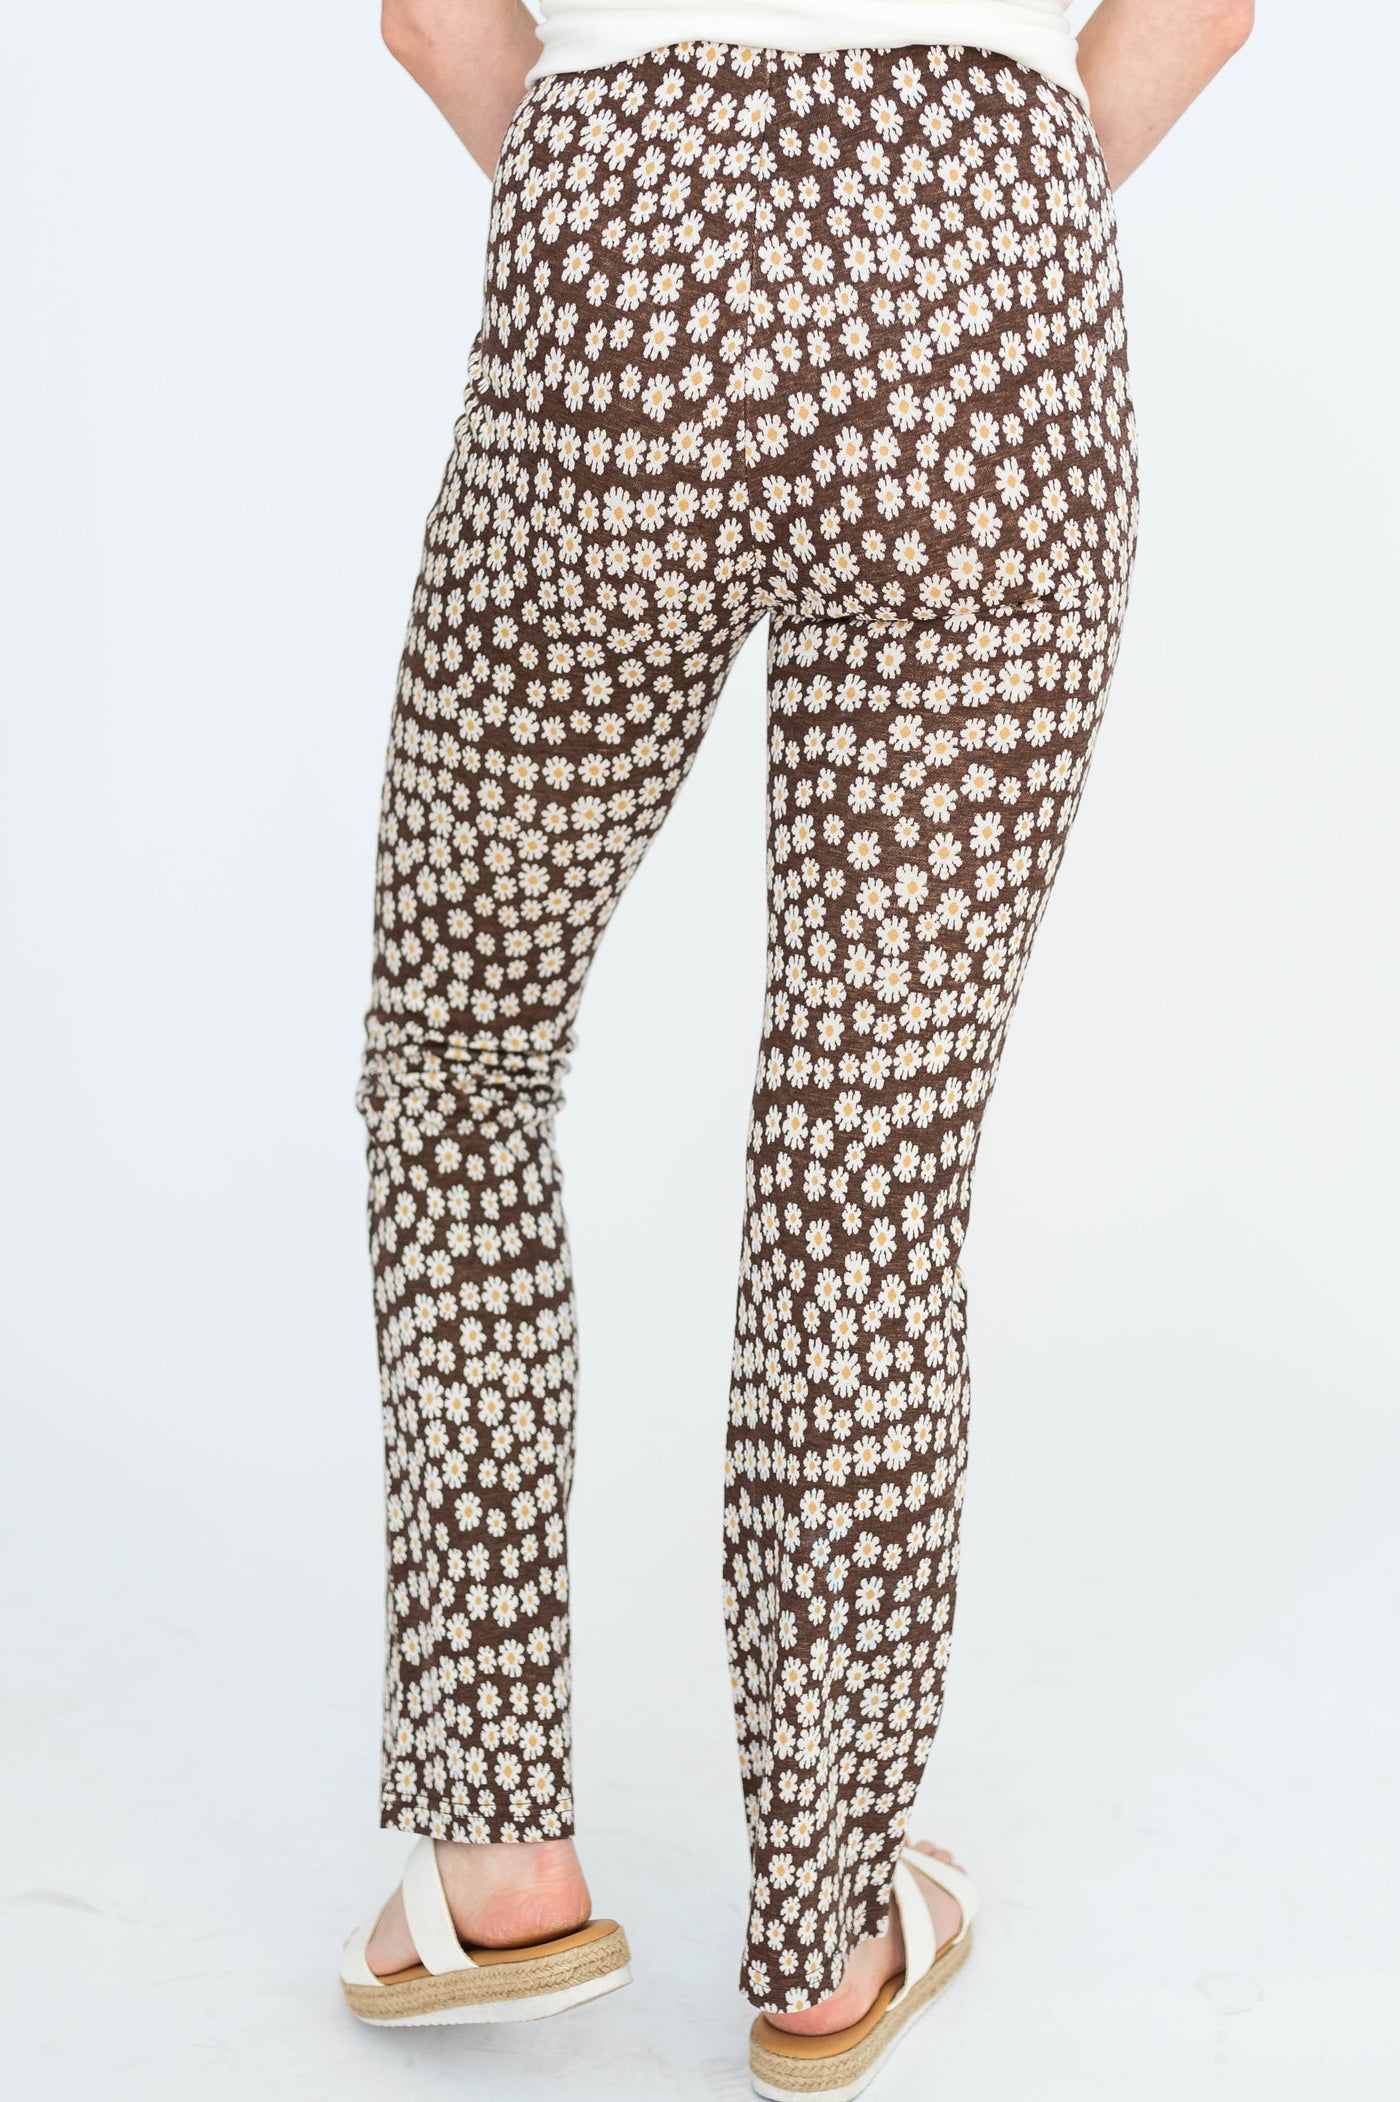 Back view of brown floral pants